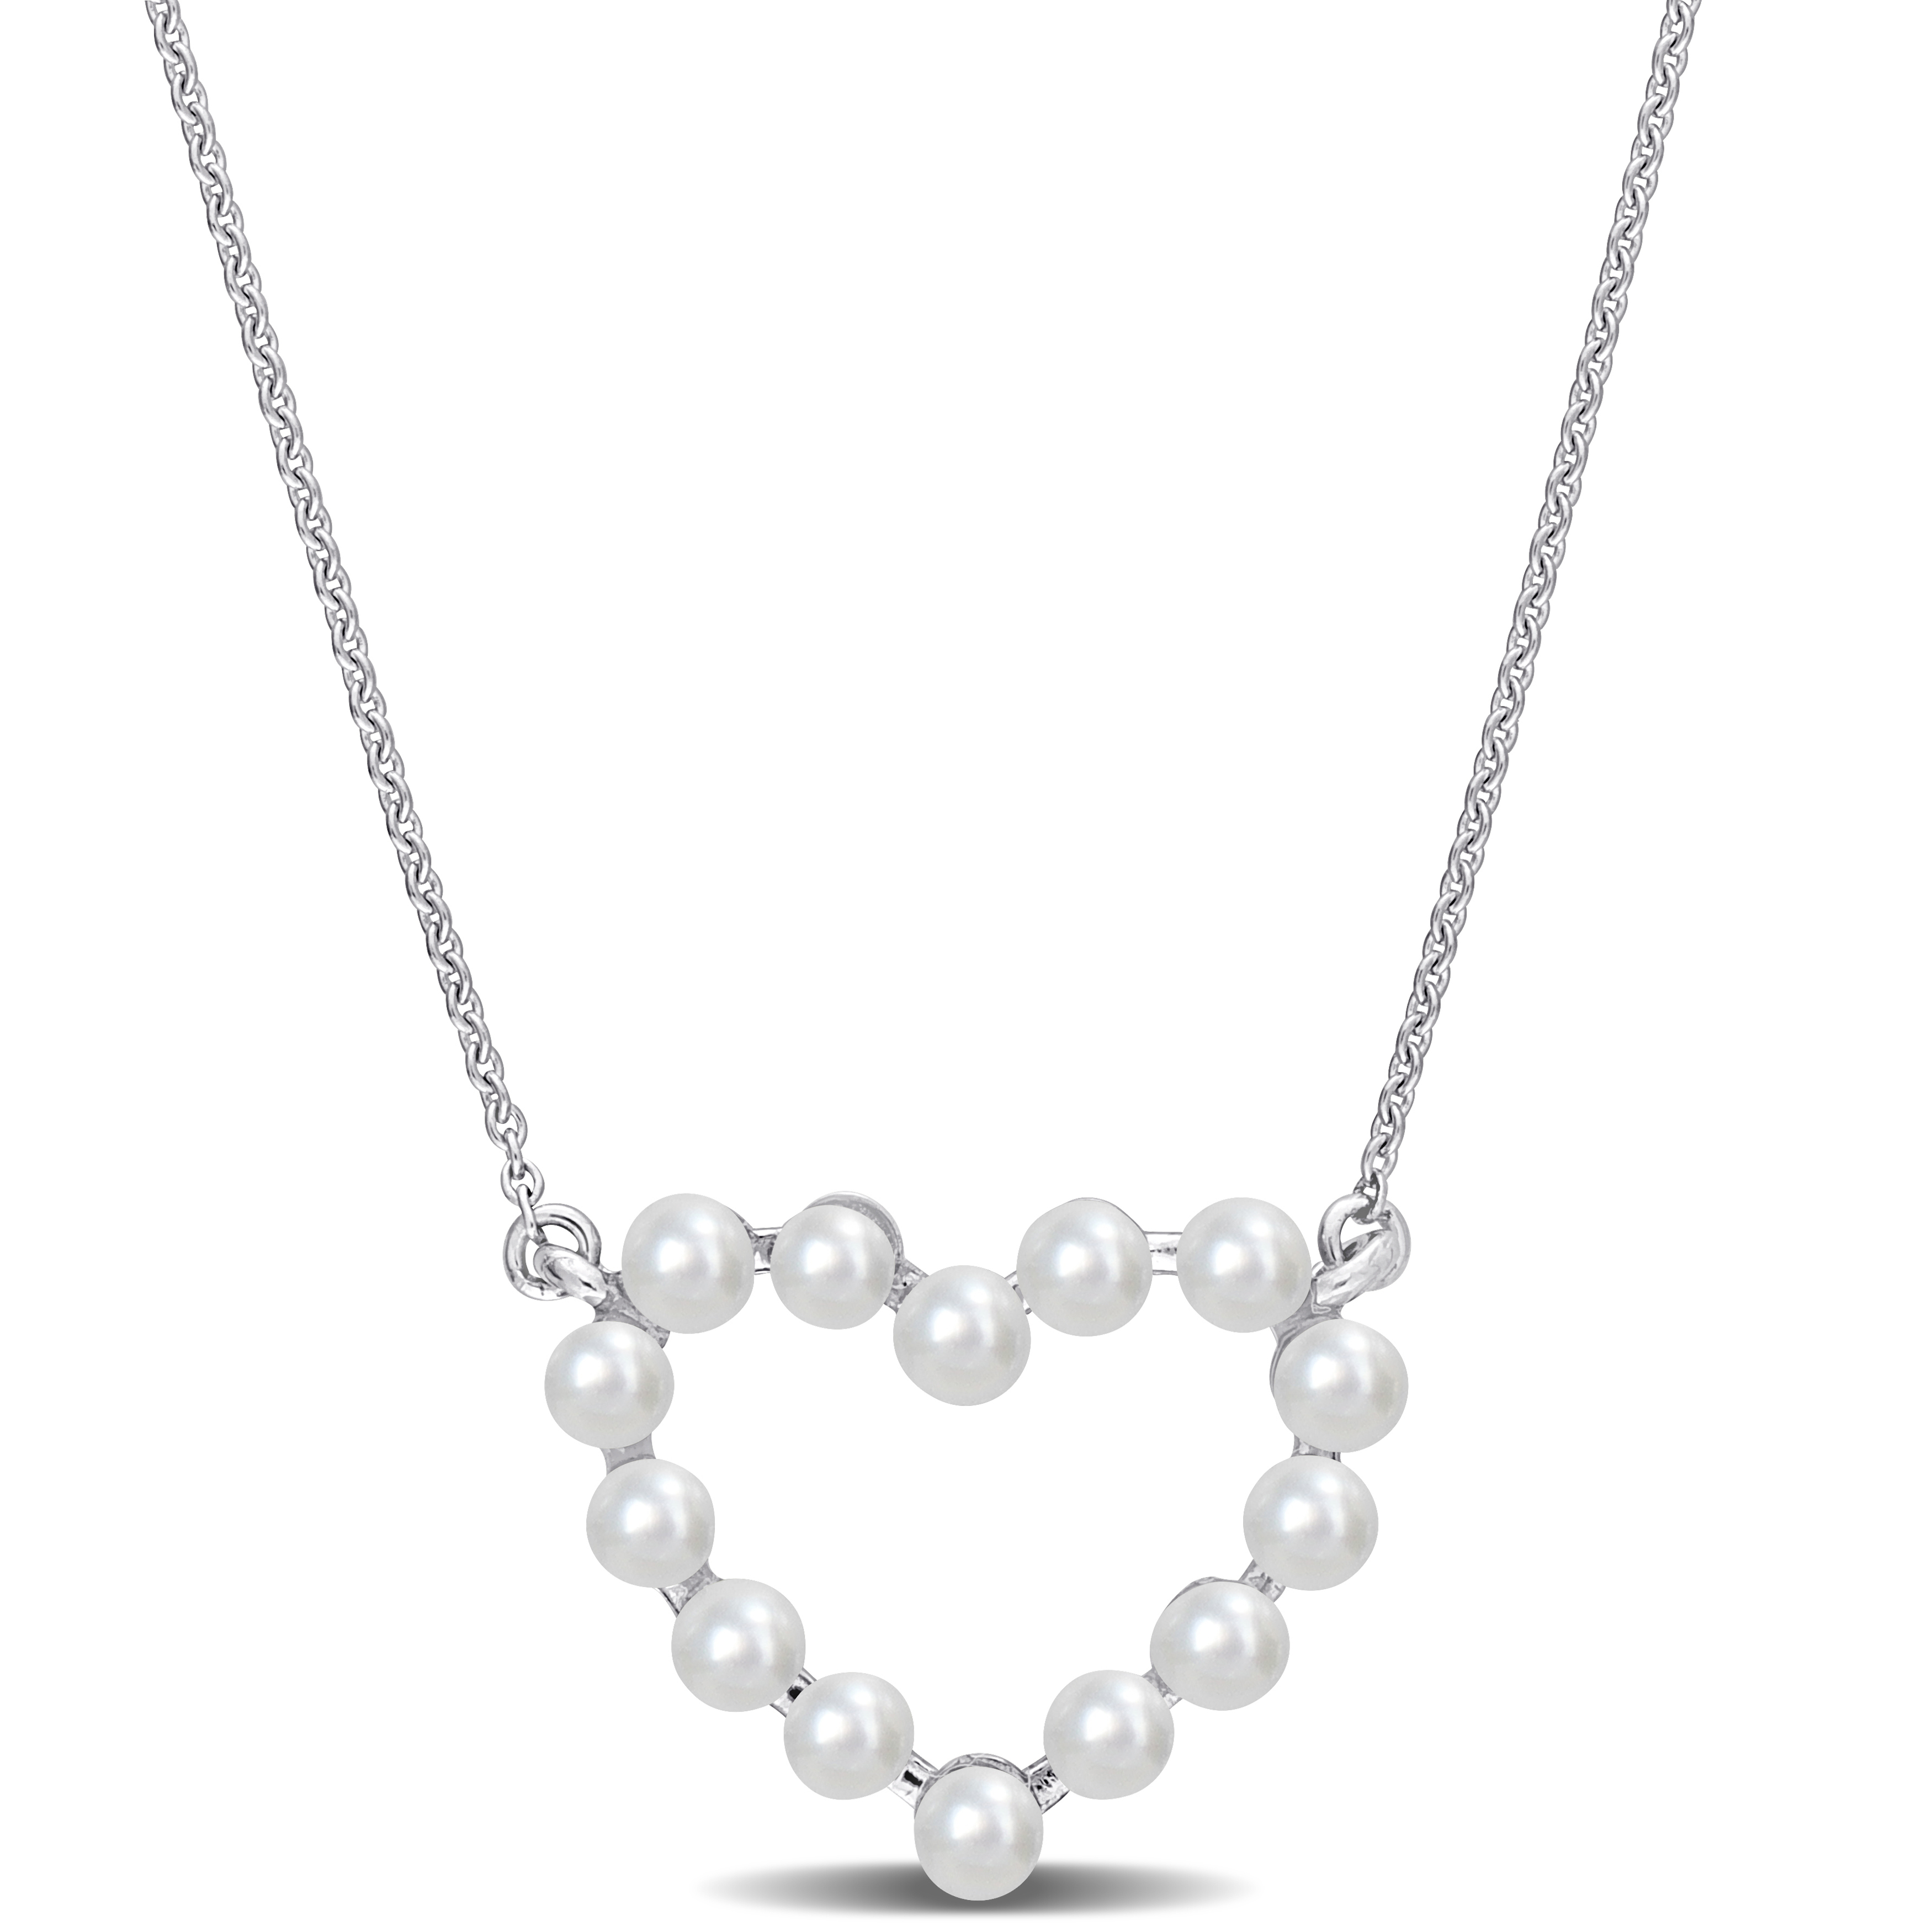 2-2.5 MM Cultured Freshwater Pearl Heart Pendant with Chain in 14k White Gold - 17 in.